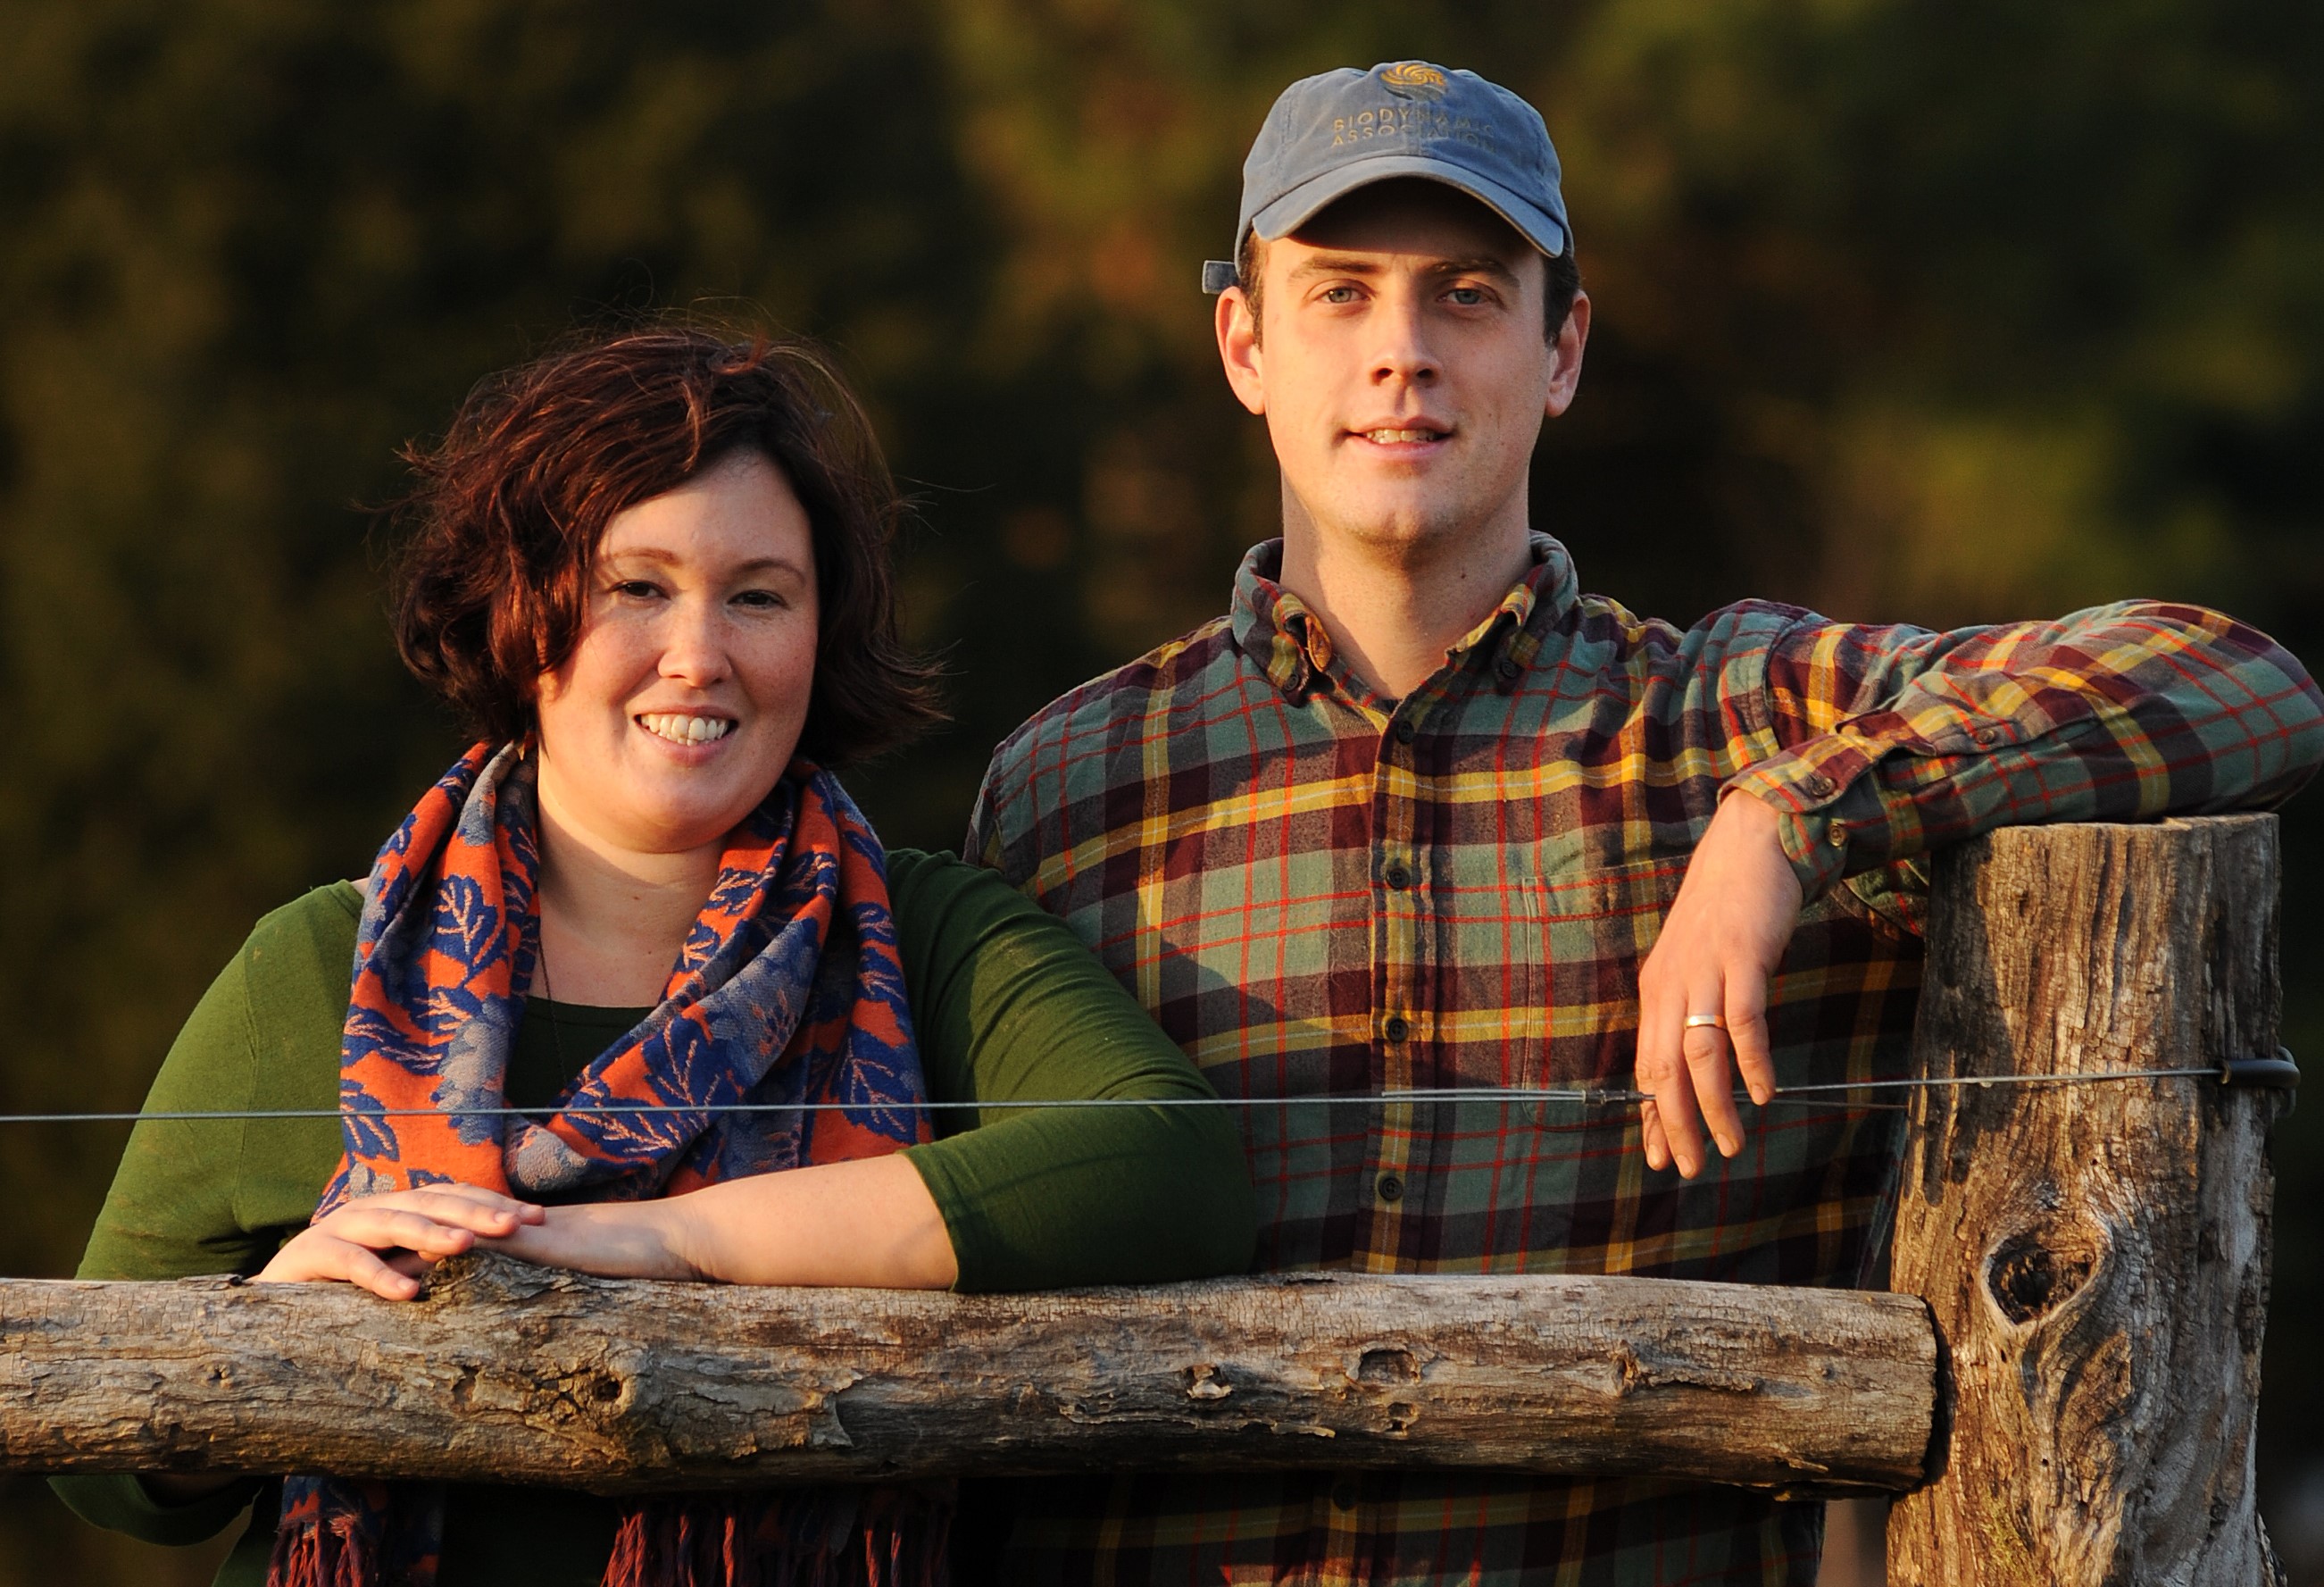 Natalie McGill and Stewart Lundy of Perennial Roots Farm